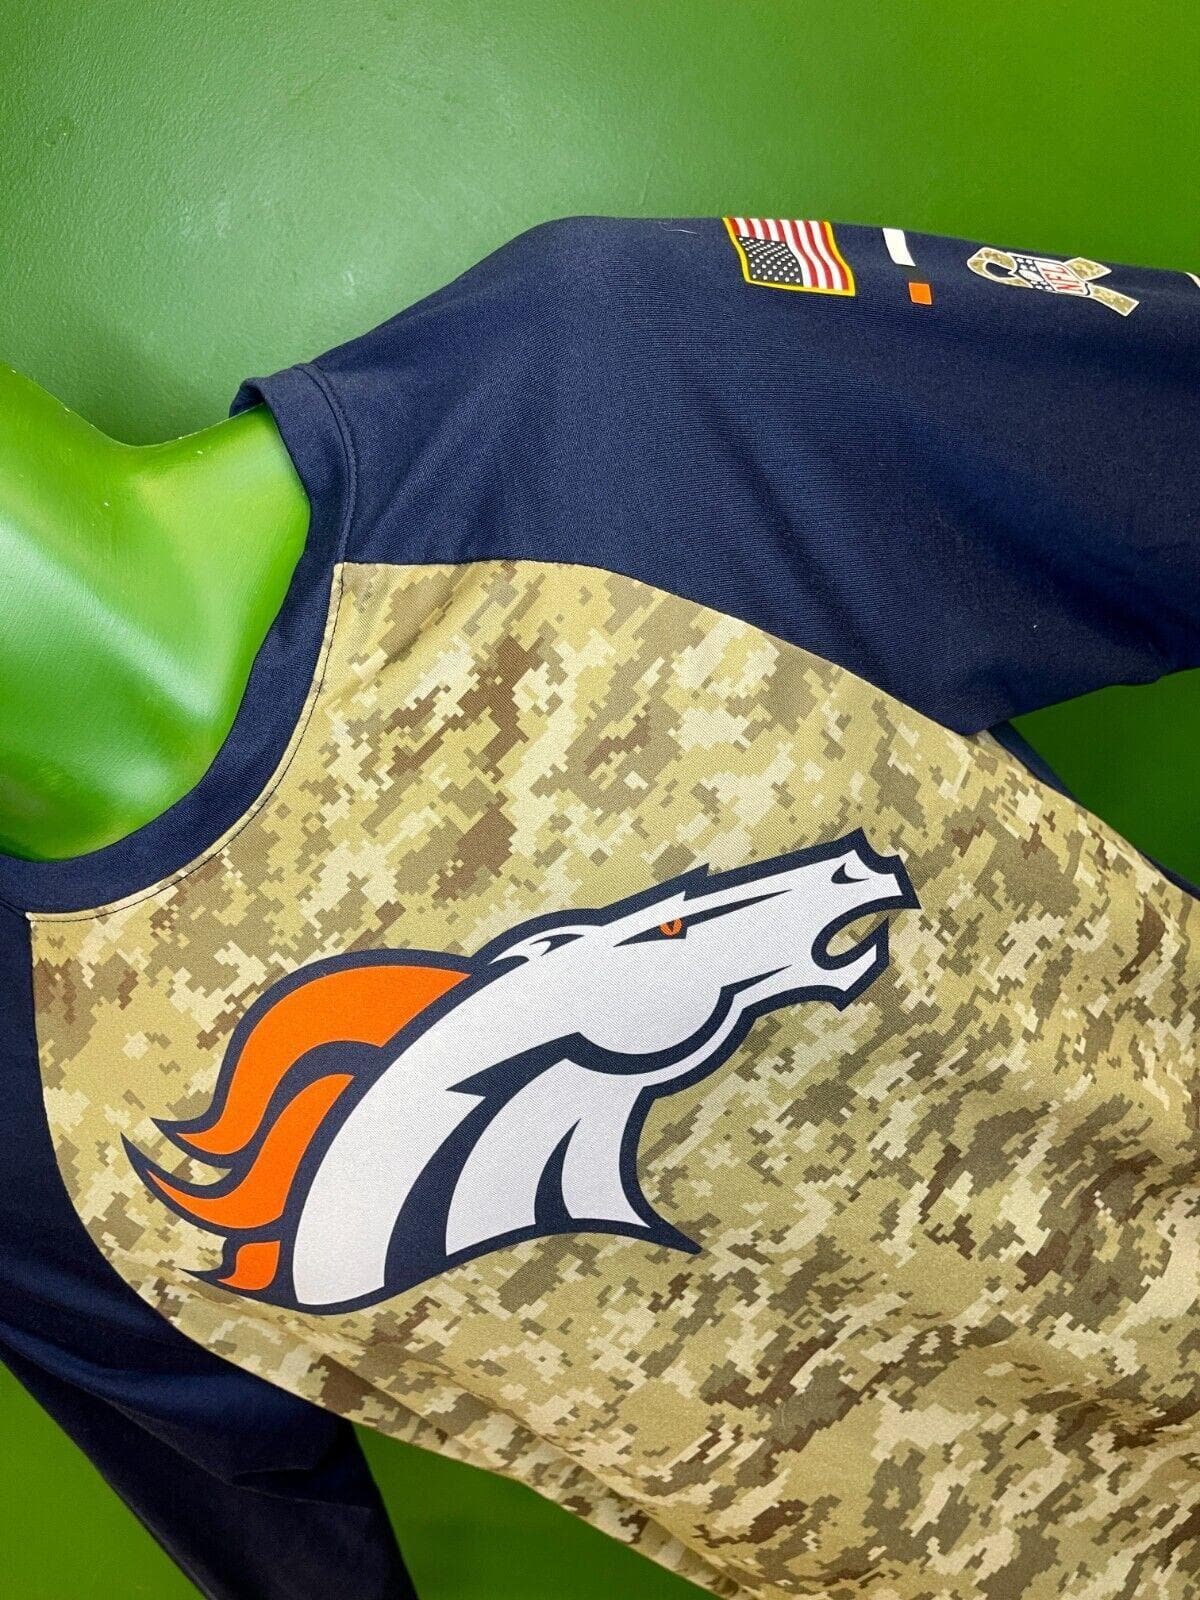 broncos salute to service jersey